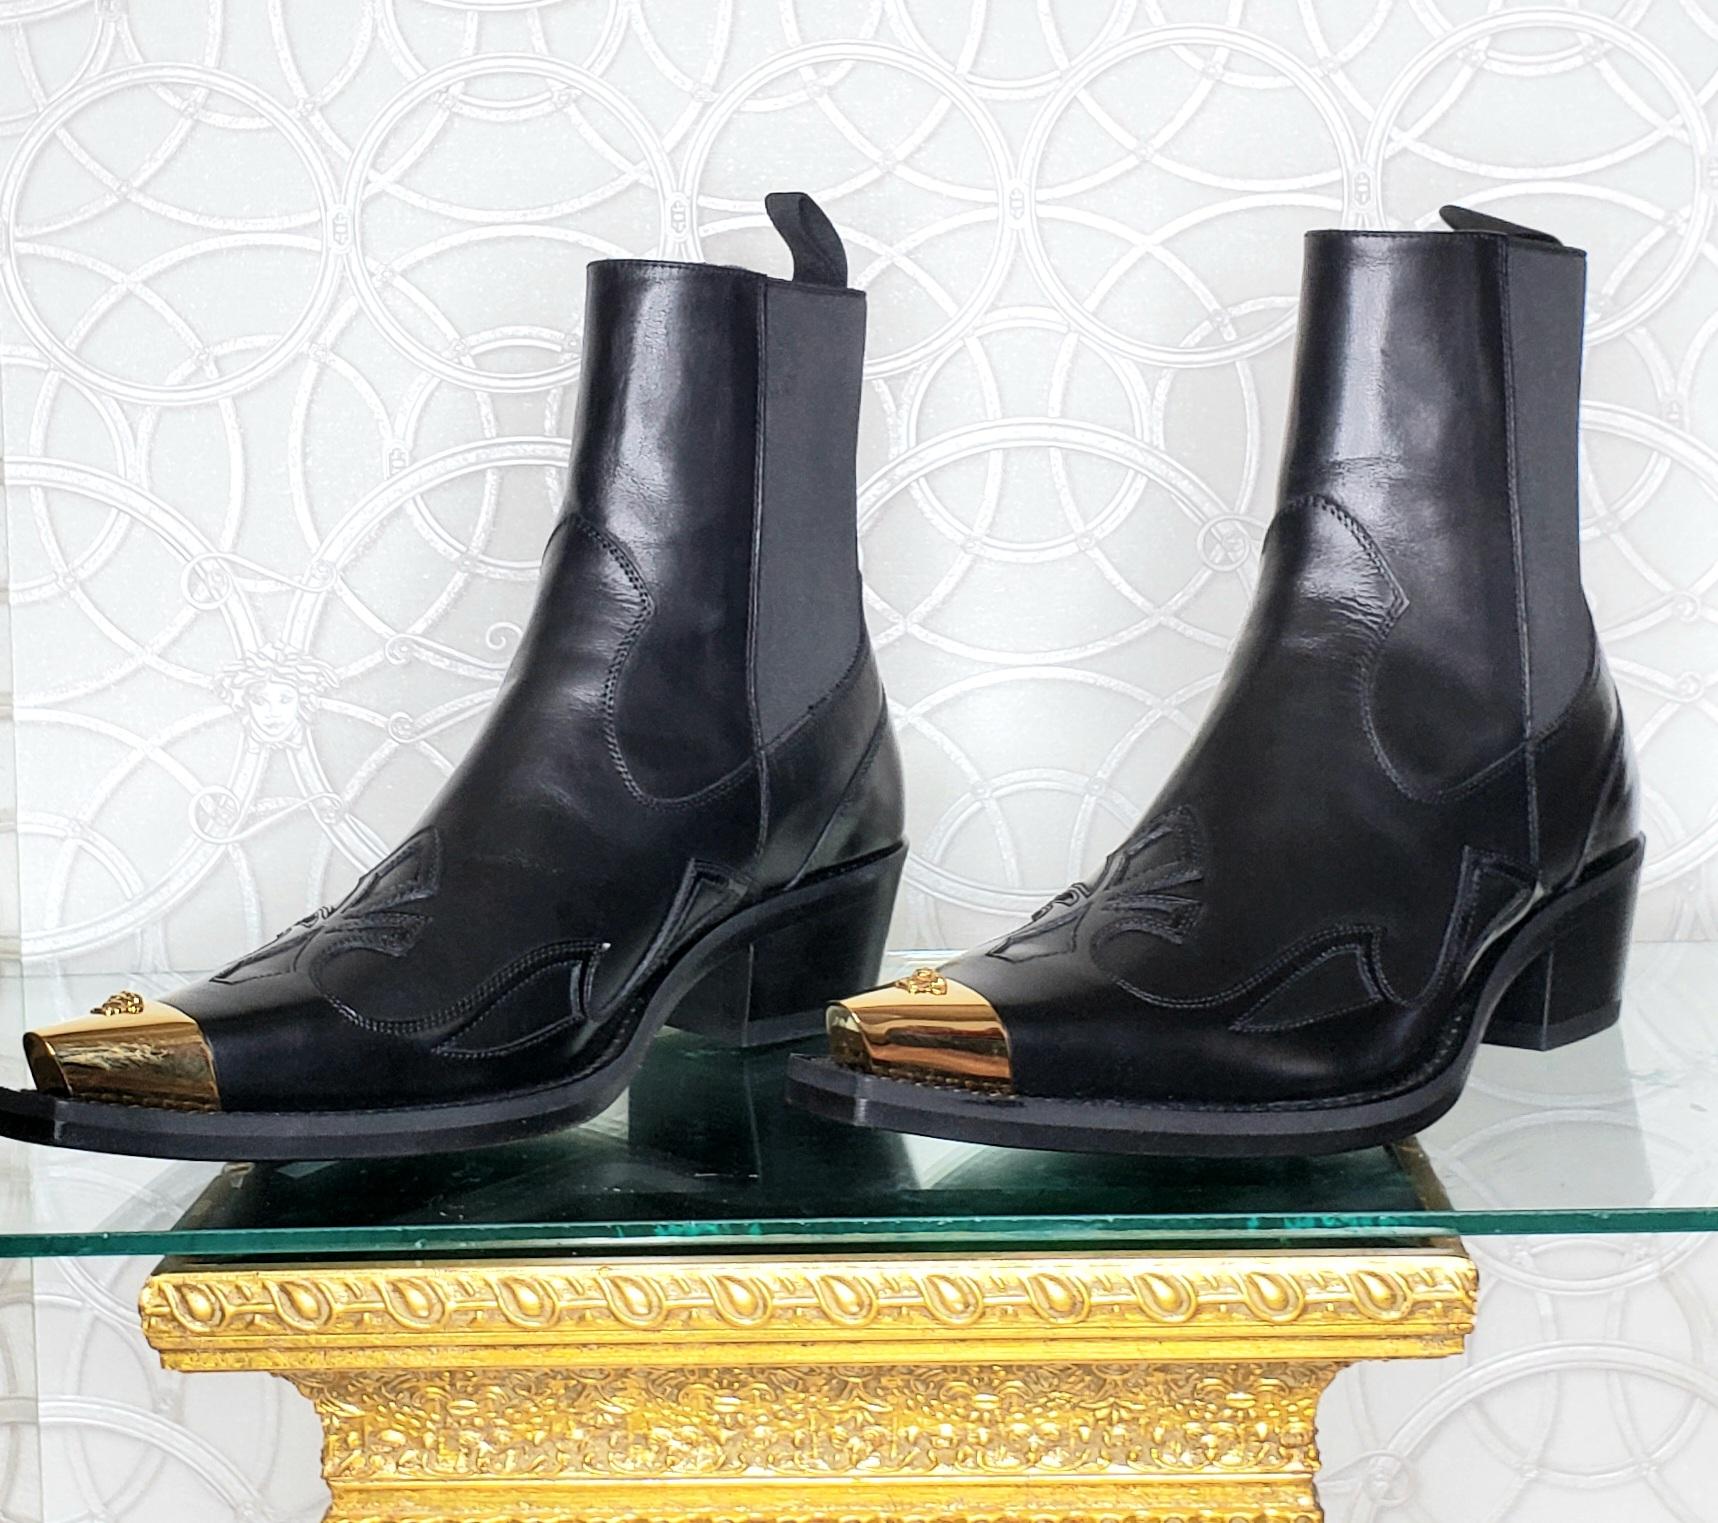 Black VERSACE GOTHIC SIGNS 24k GOLD PLATED MEDUSA TIPS BLACK LEATHER BOOTS 40.5 - 7.5